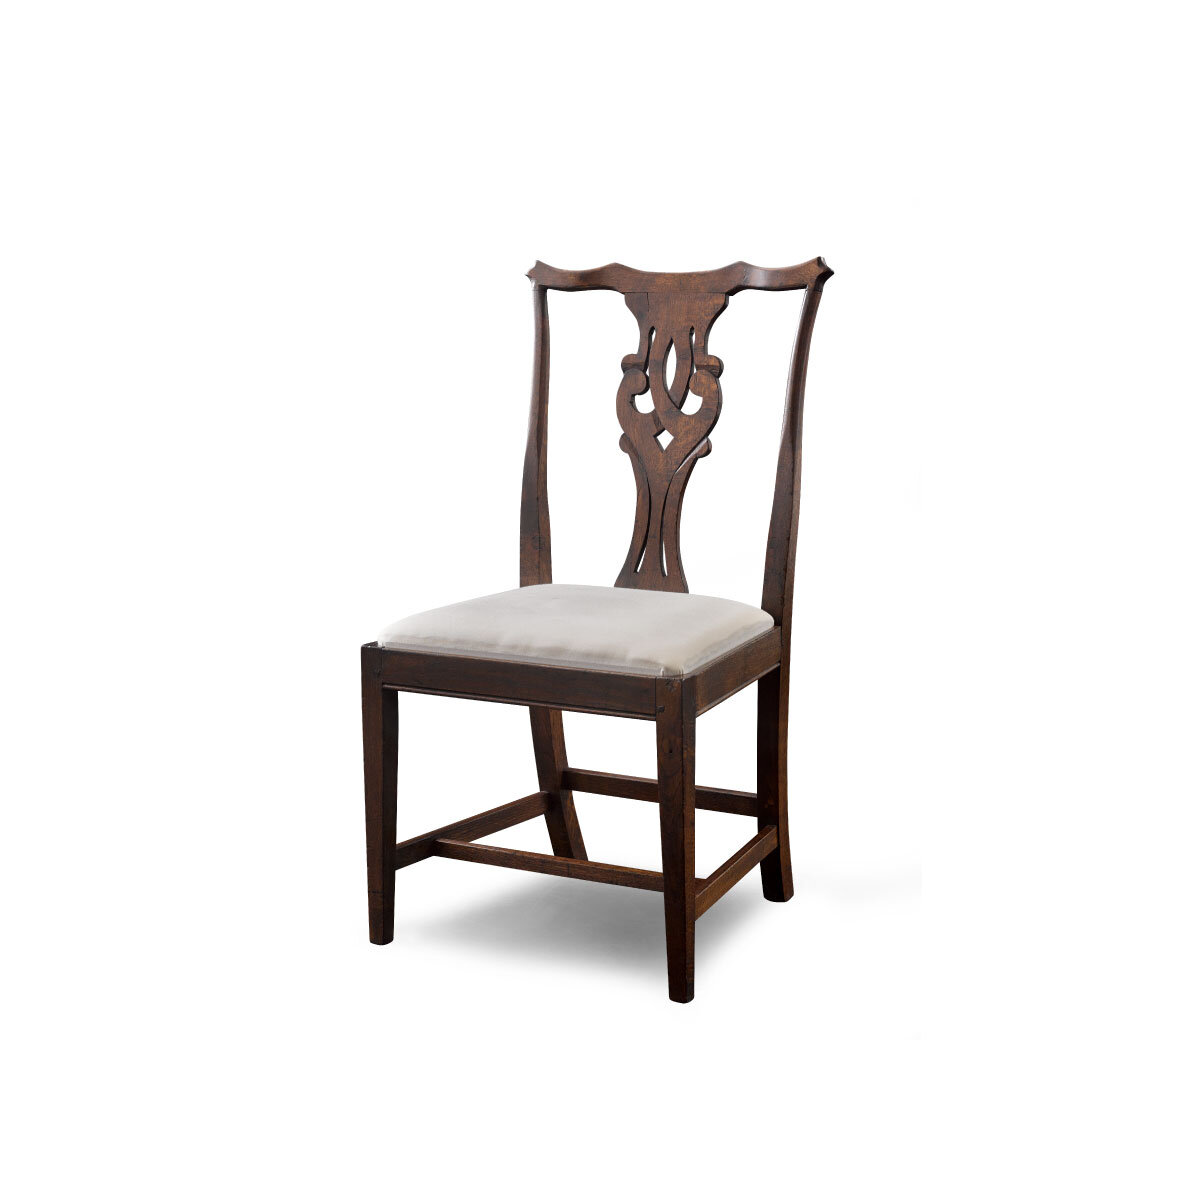 Country Chippendale Chair